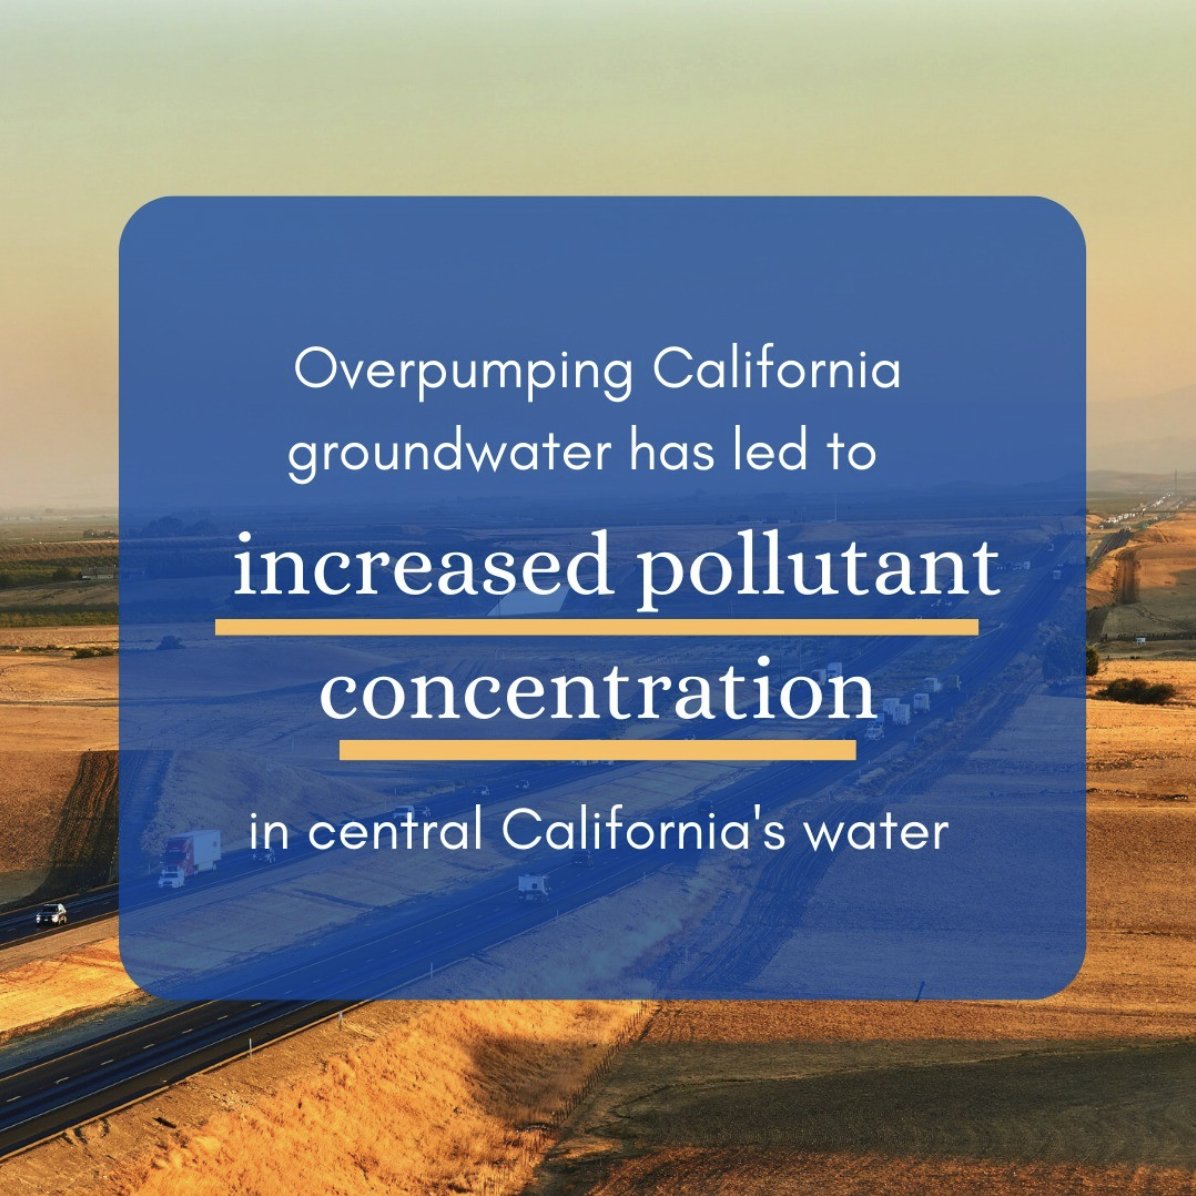 According to the Yale Environment Review, California's central valley has been overpumping groundwater reserves. This means that the concentrations of pollutants, such as arsenic, have greatly increased in these reserves.

#unwater #watersecurity #waterforall #sdgs  #humanrights